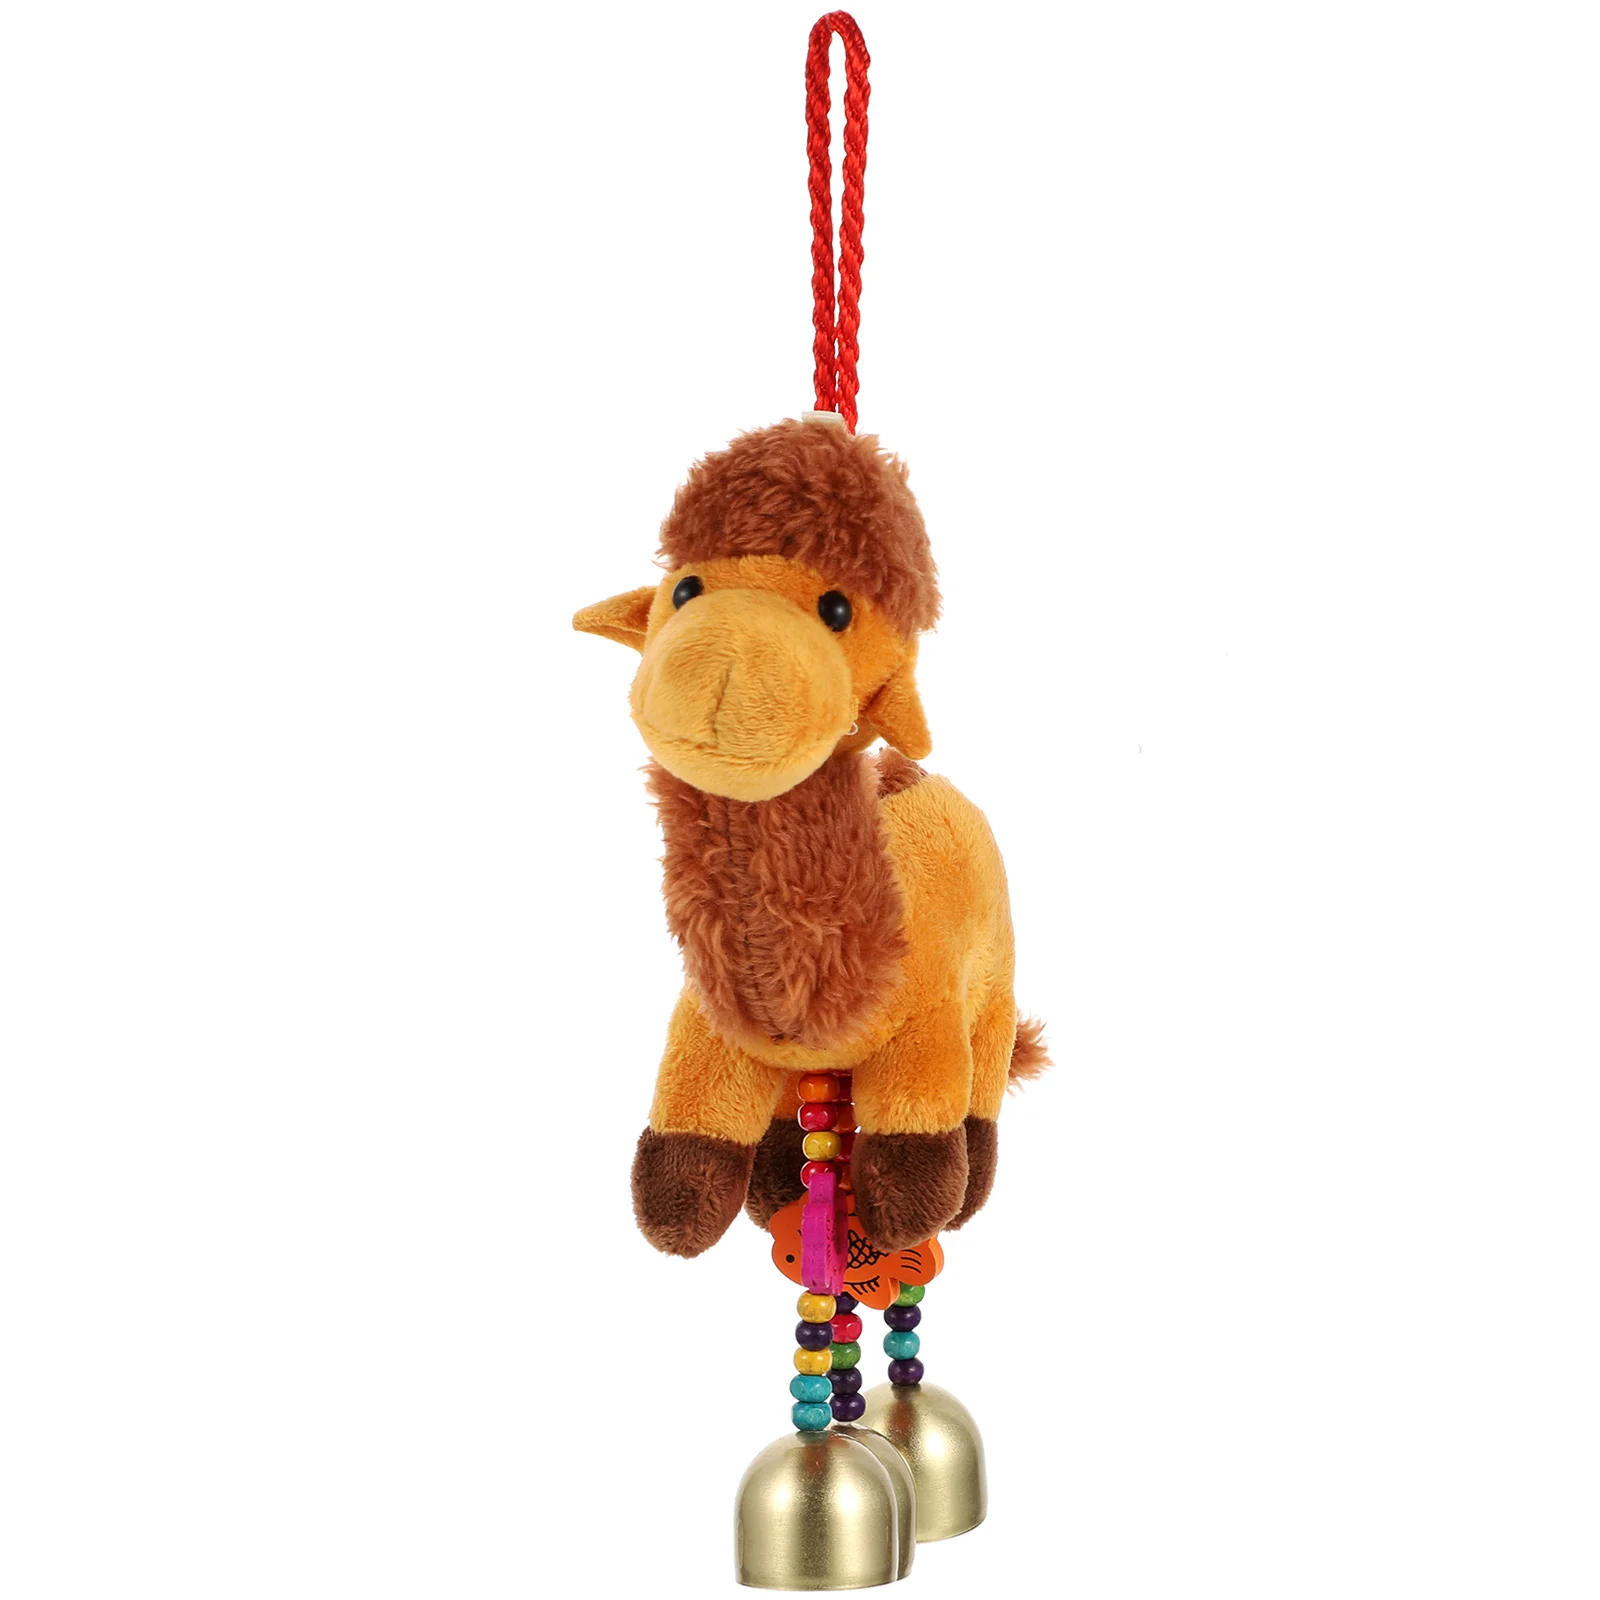 Camel Child Toys Keyring Bag Pendant Mini Kids Party Favors Metal Plush Keychains Aesthetic Childrens 24pcs angel keychains pendants with organza bags and thank you tag for wedding party return gifts favors